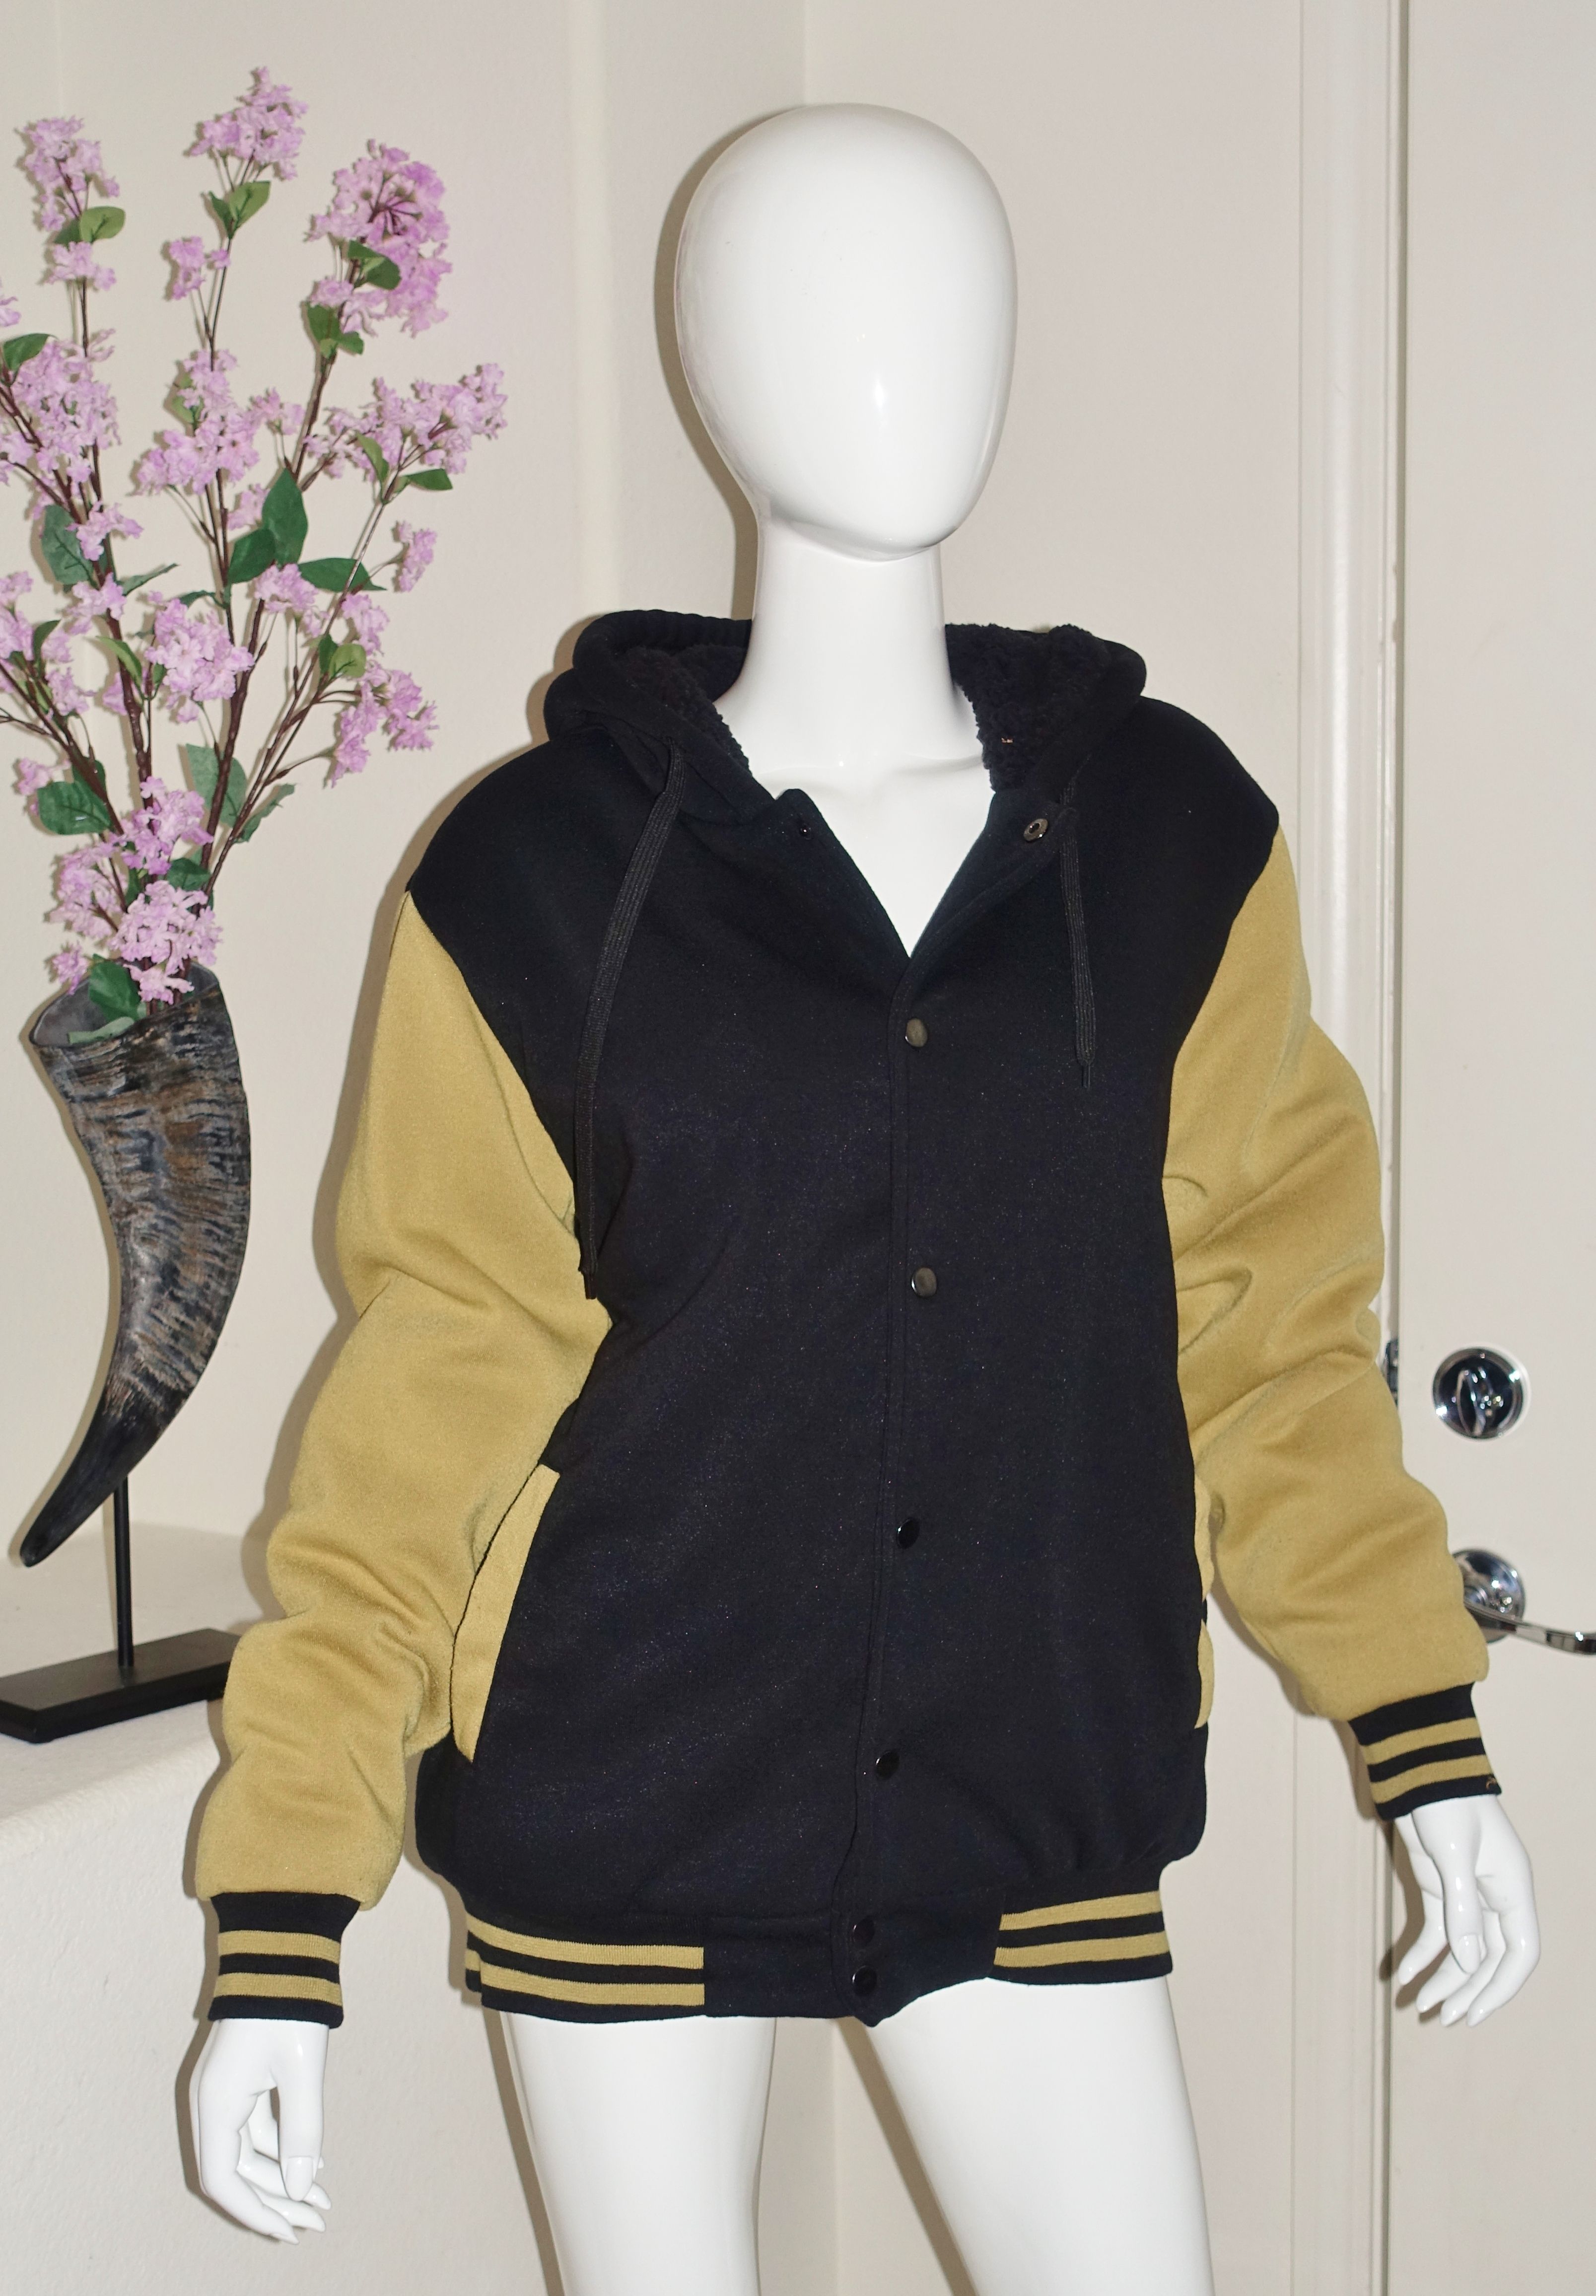 (FREE DELIVERY) unisex black/yellow hoodie jacket (size L)